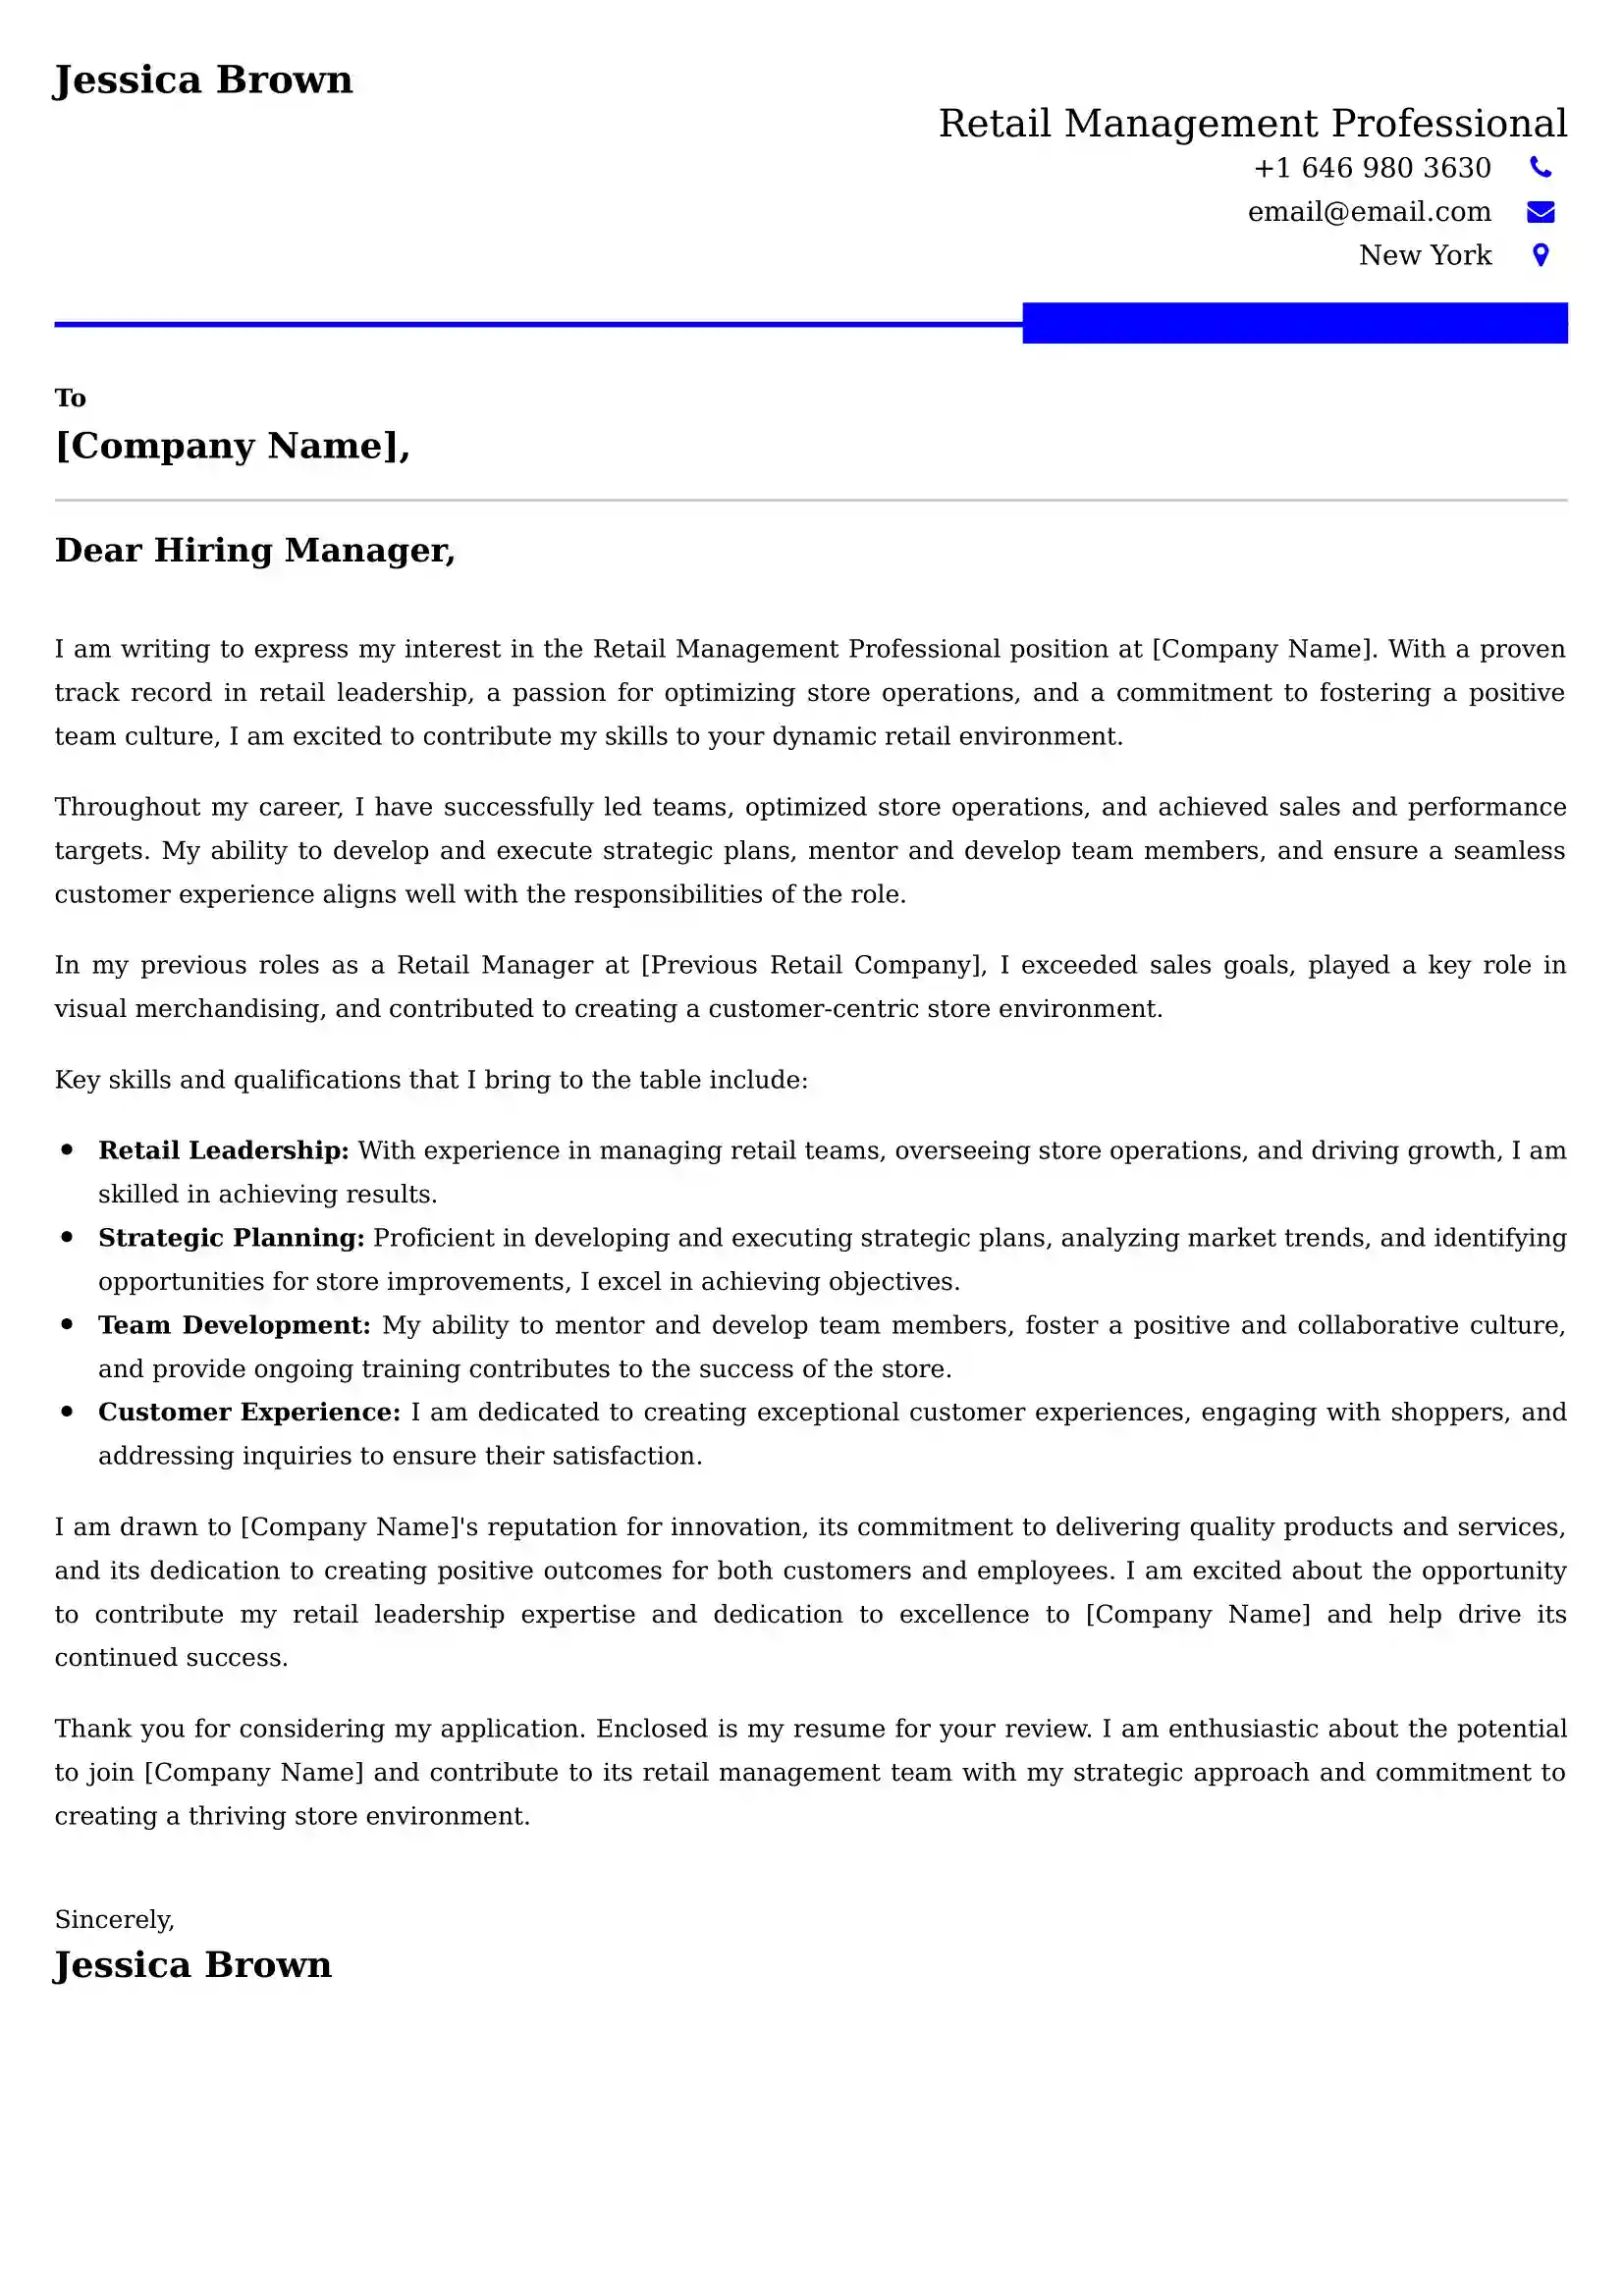 Retail Management Professional Cover Letter Examples for UK 